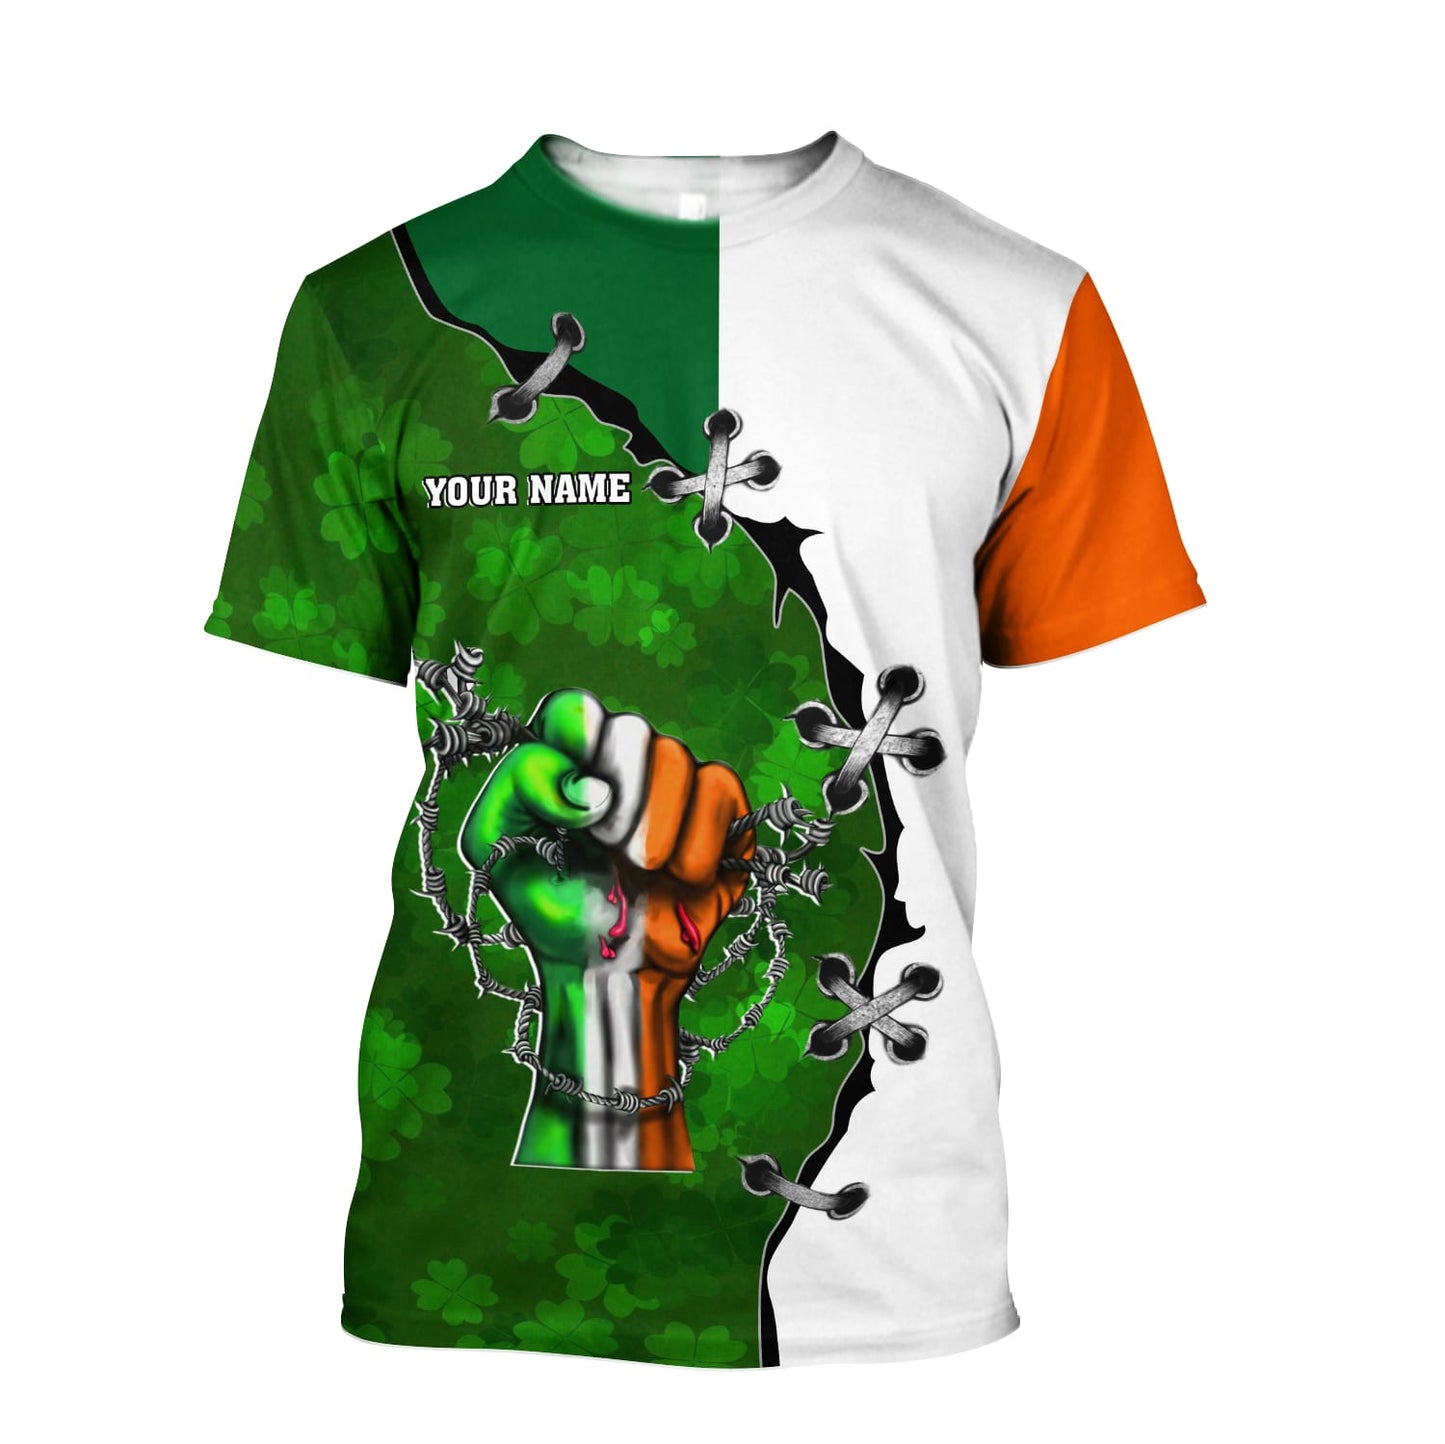 Irish St Patrick Day Personalized 3d Printed Shirts - St Patricks Day 3D Shirts for Men & Women